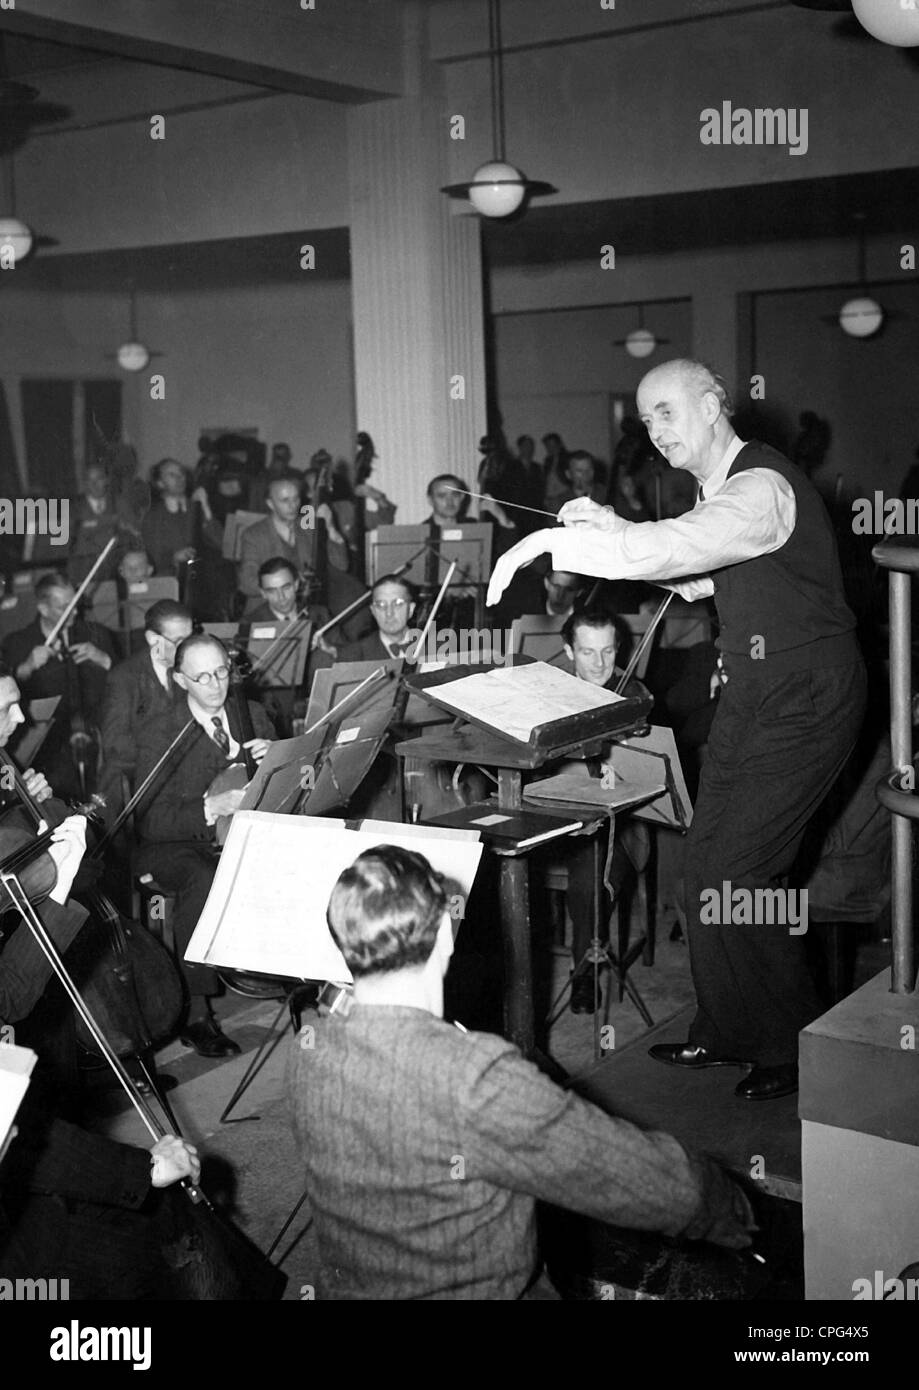 Furtwaengler, Wilhelm, 25.1.1886 - 30.11.1954, German musician (conductor, composer), during the rehearsal with the members of the Berlin philharmonic orchestra, London, 1948, Stock Photo